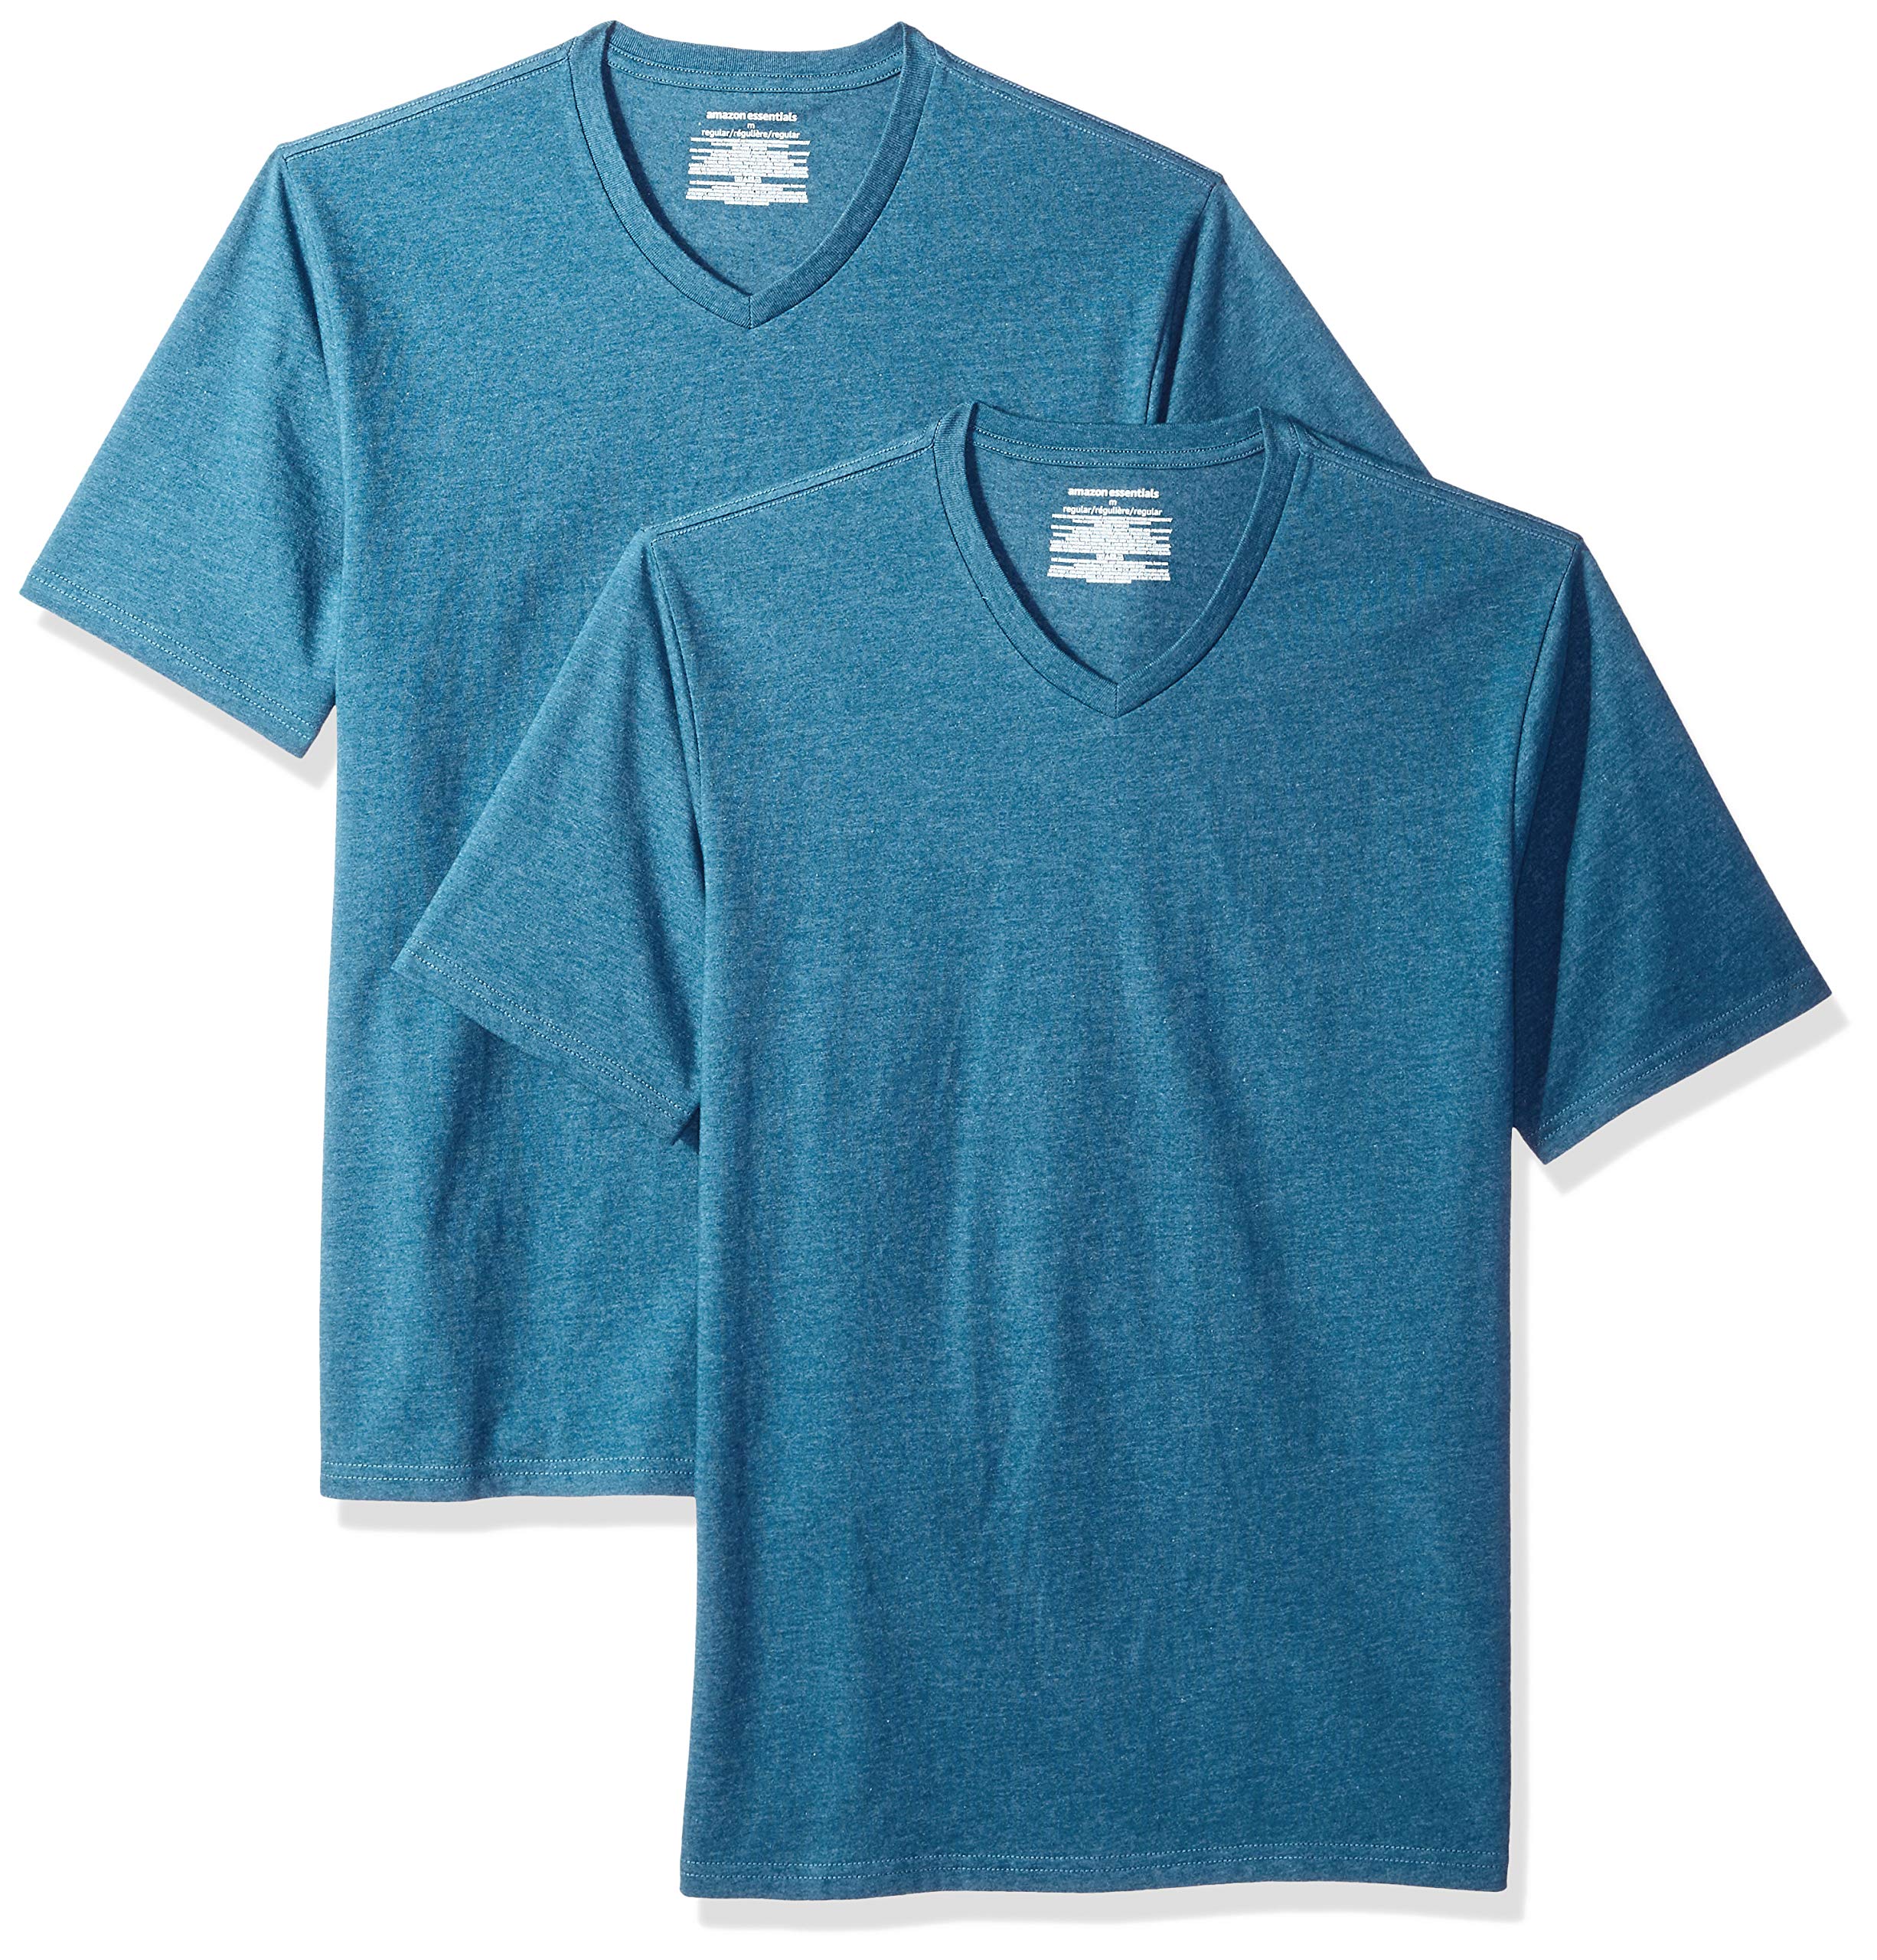 Amazon Essentials Regular-Fit Short-Sleeve V-Neck T-Shirt, Pack of 2 ...Assorted from $5.73